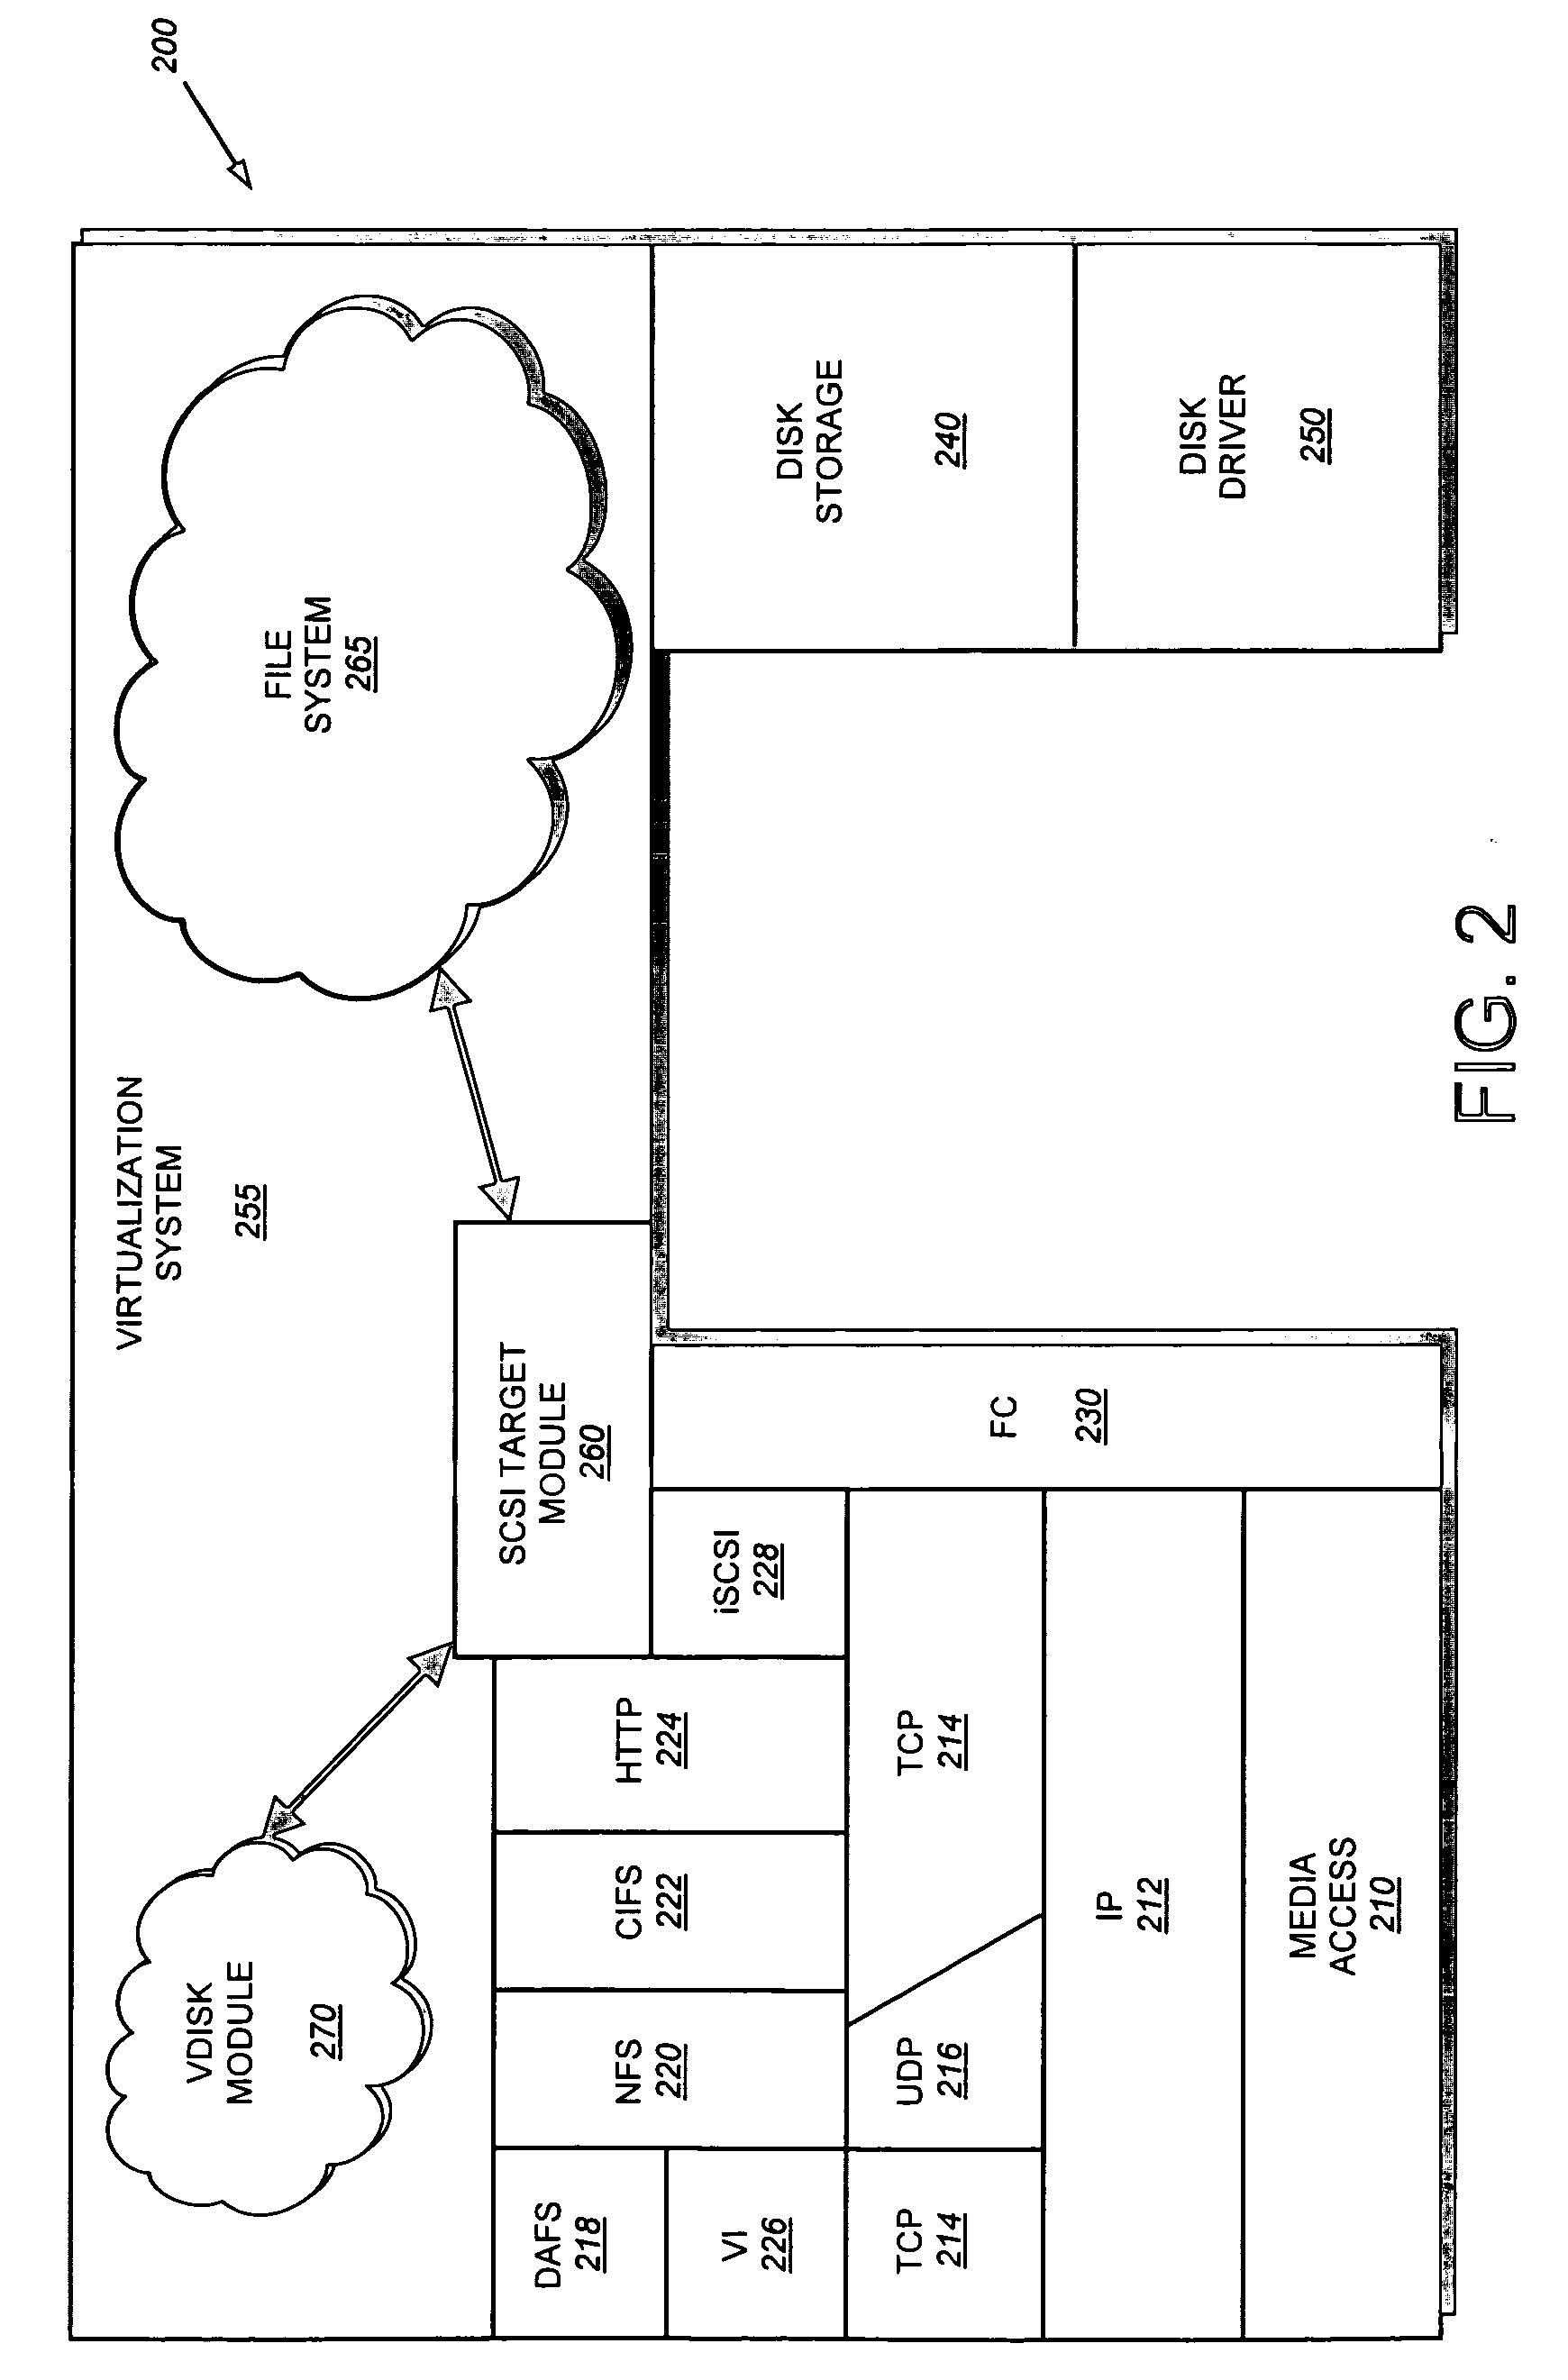 System and method for symmetric triple parity